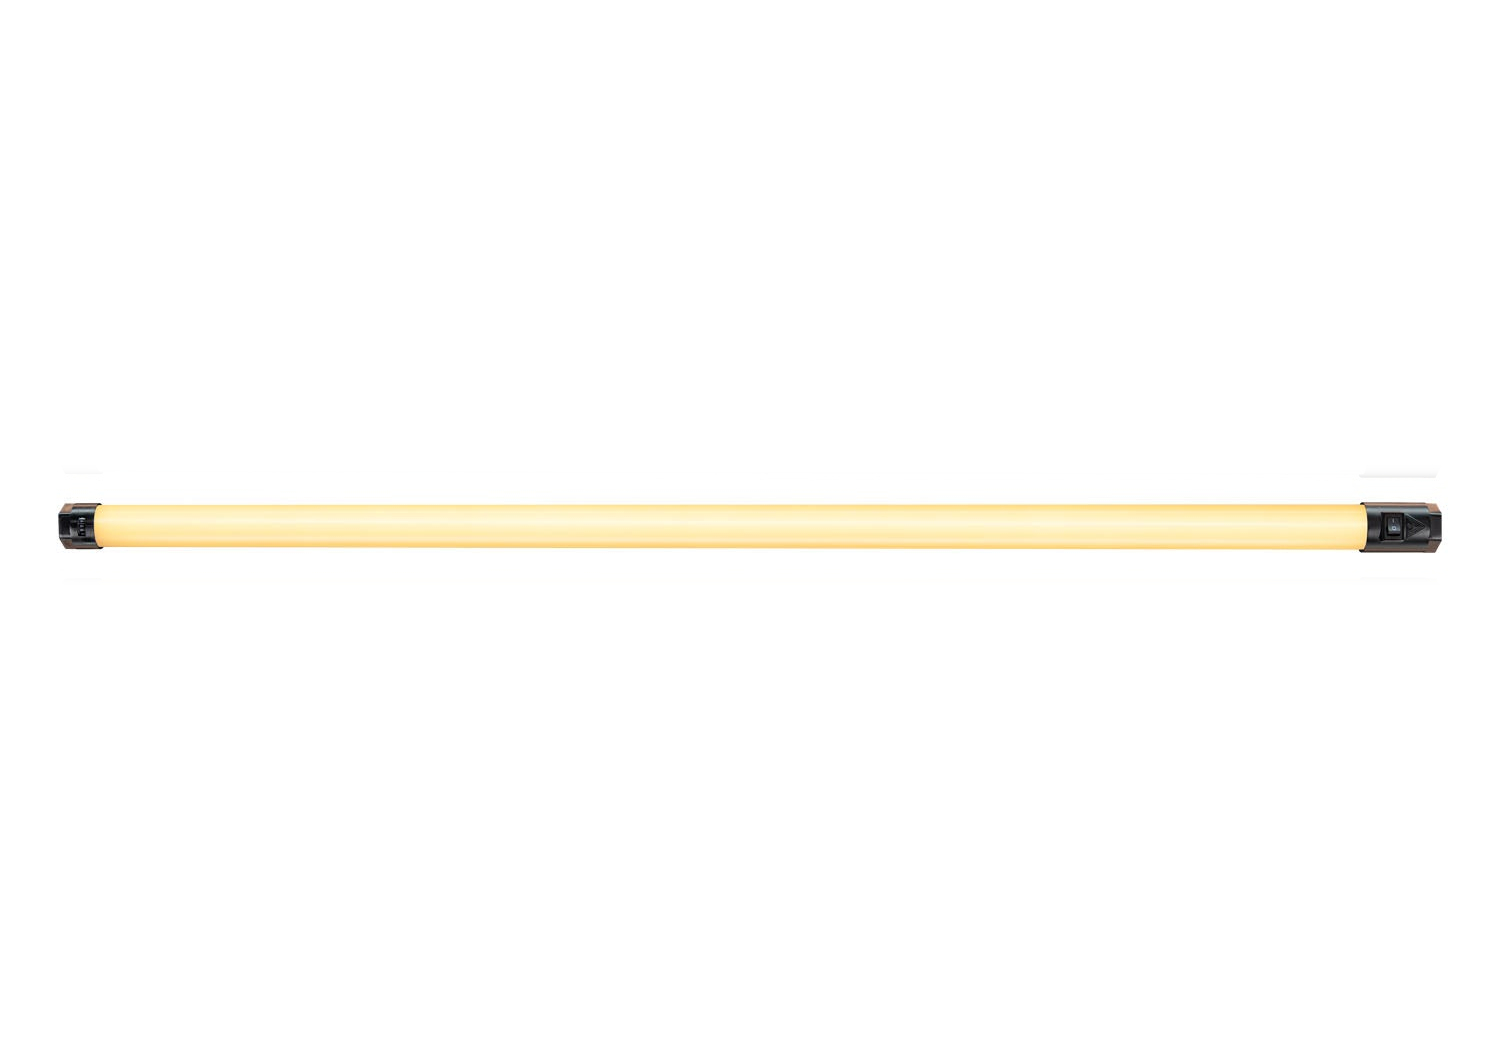 Quasar Science Crossfade X 4FT 50W Linear LED Tube With A Tunable Bi-color Range Of | Full Compass Systems